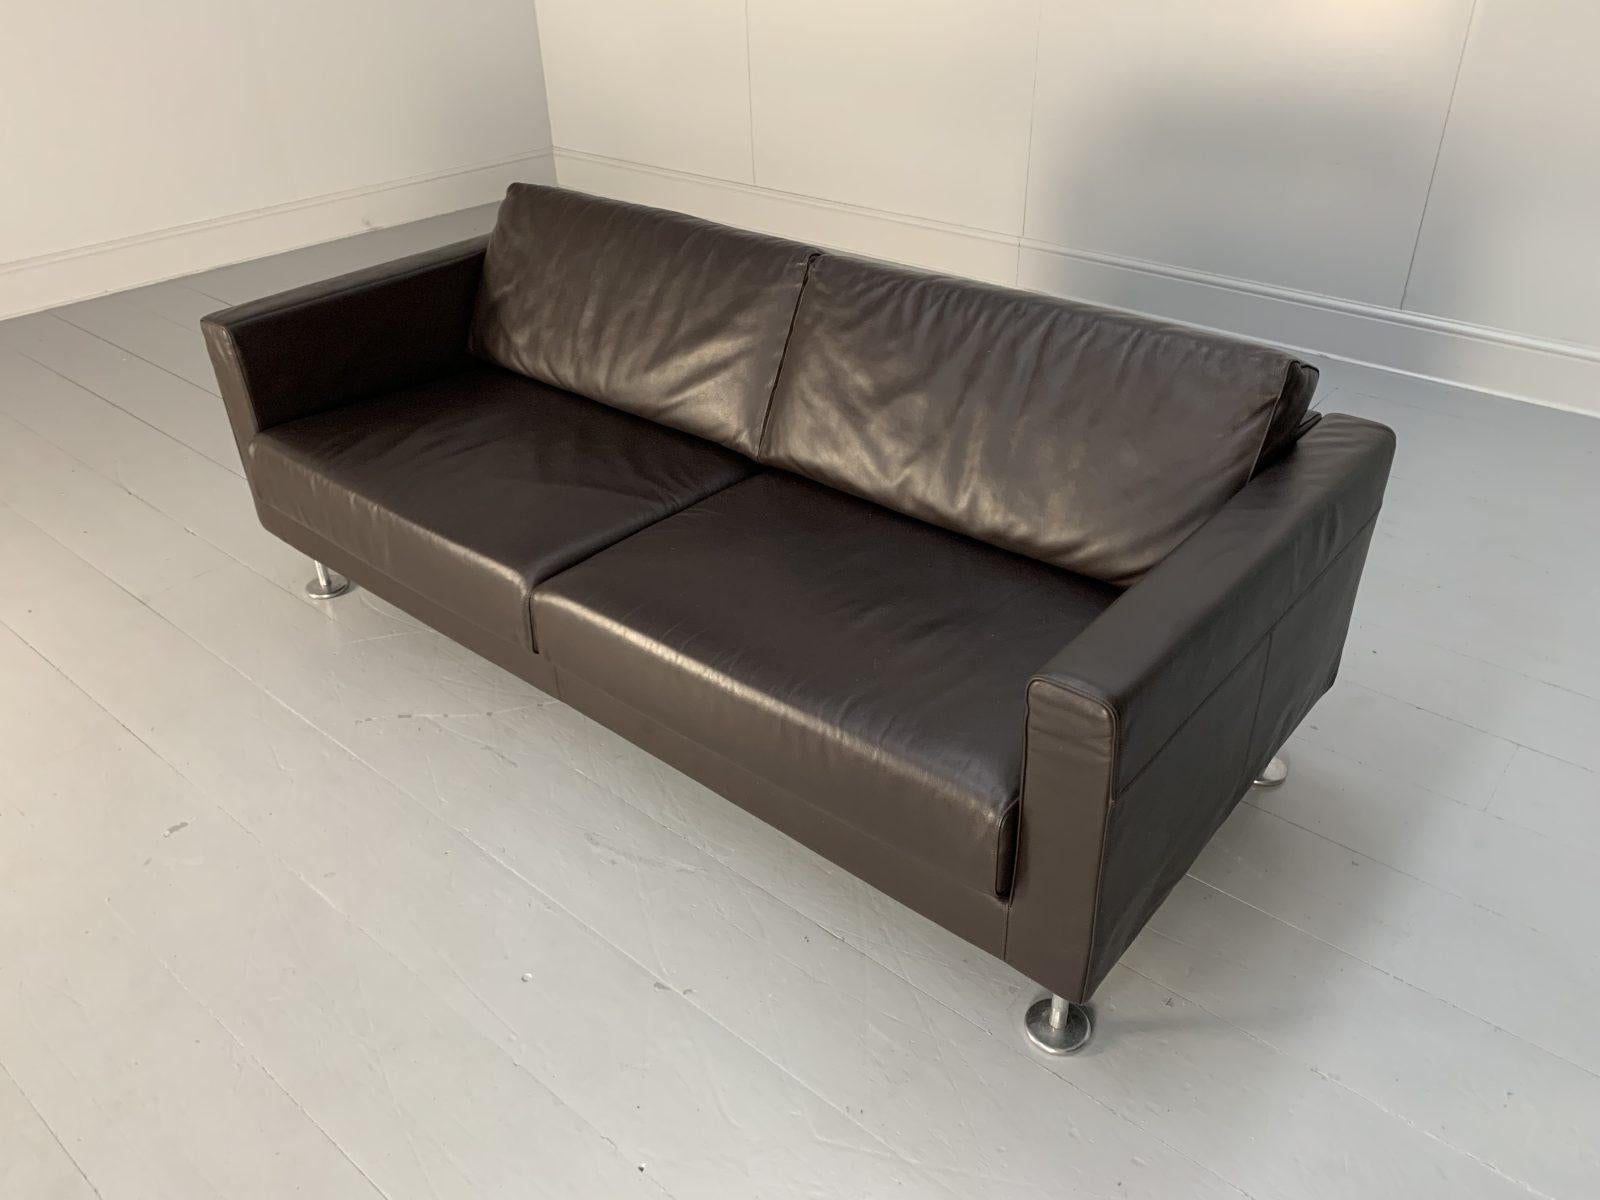 Vitra “Park” 2-Seat Sofa, in Dark Brown Leather For Sale 2